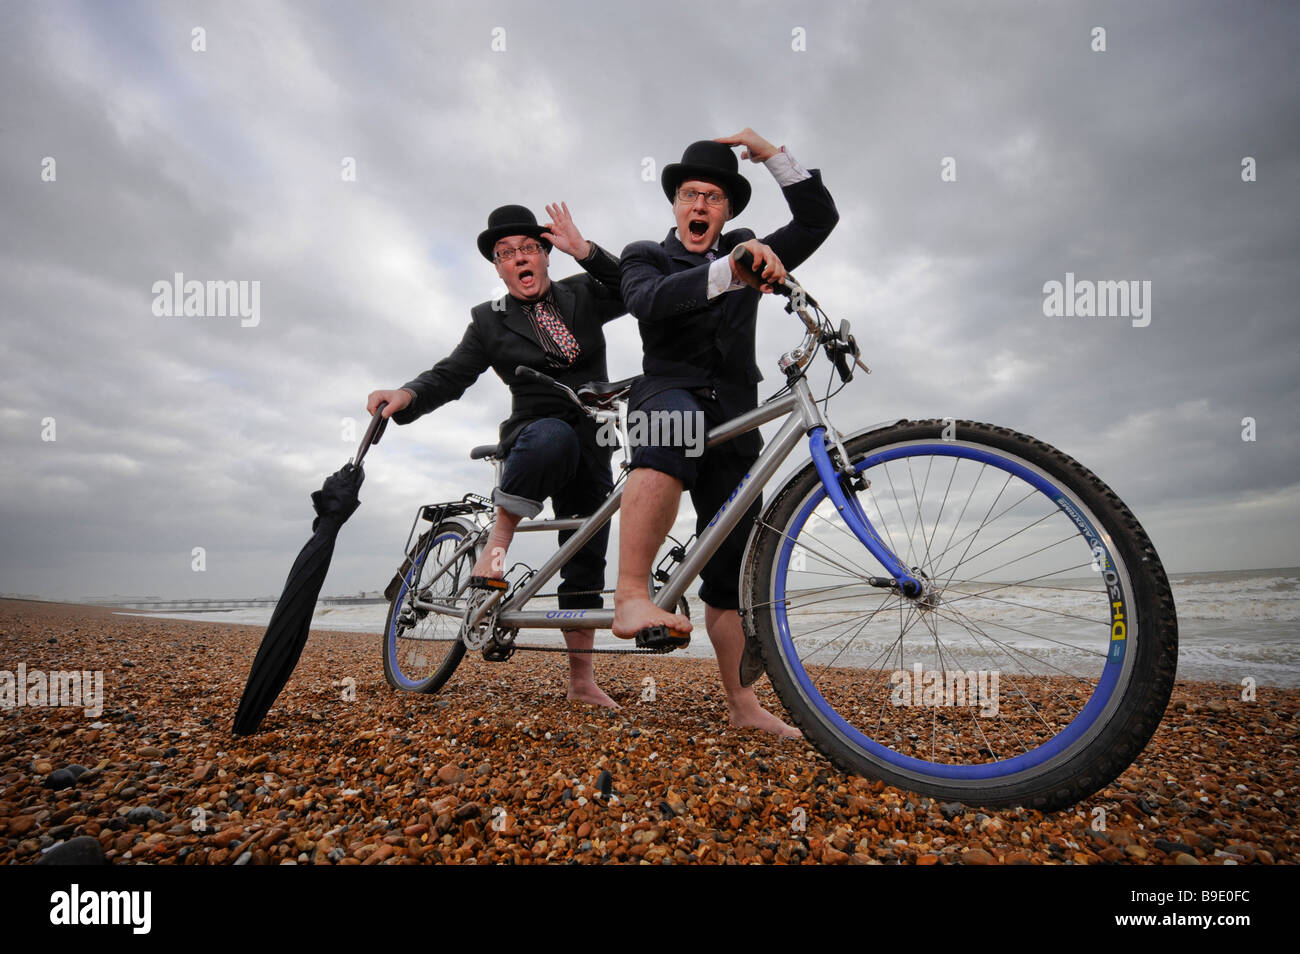 City gents limber up on Brighton beach with their tandem before competing in 'The Rat Race' event . Stock Photo